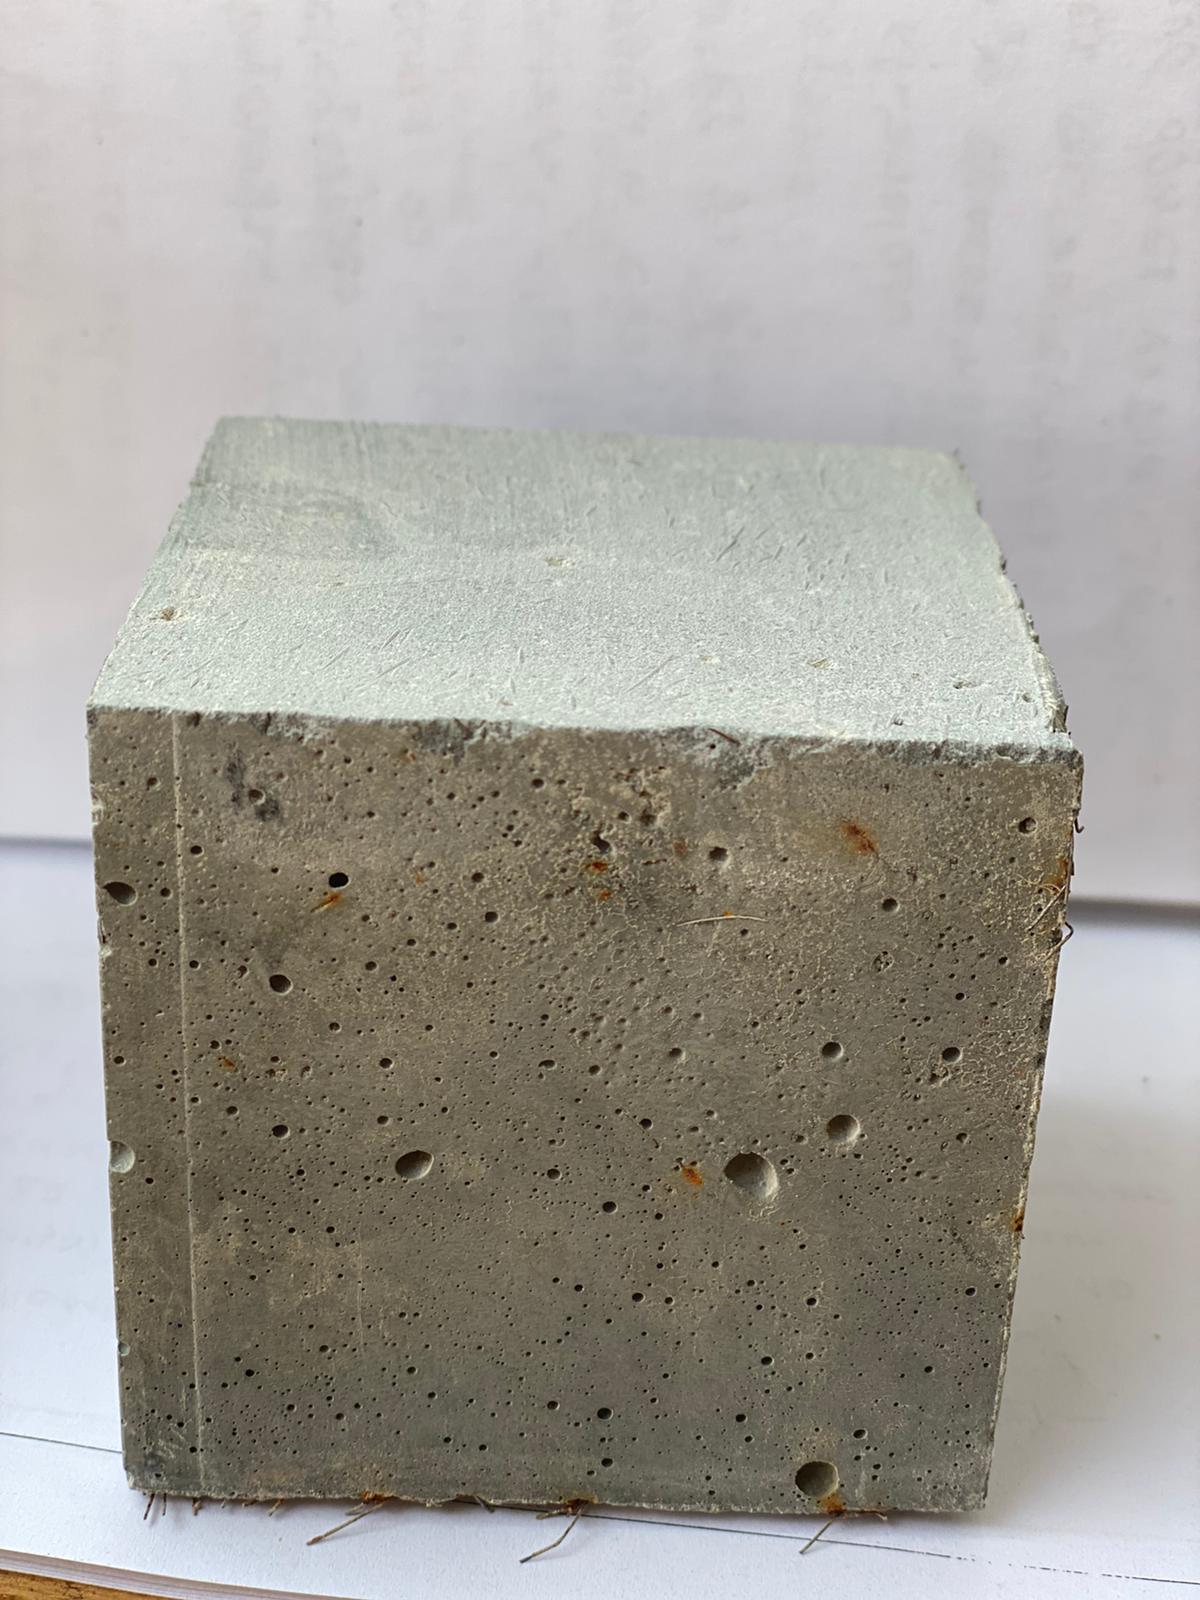 ForteCrete withstands rough conditions